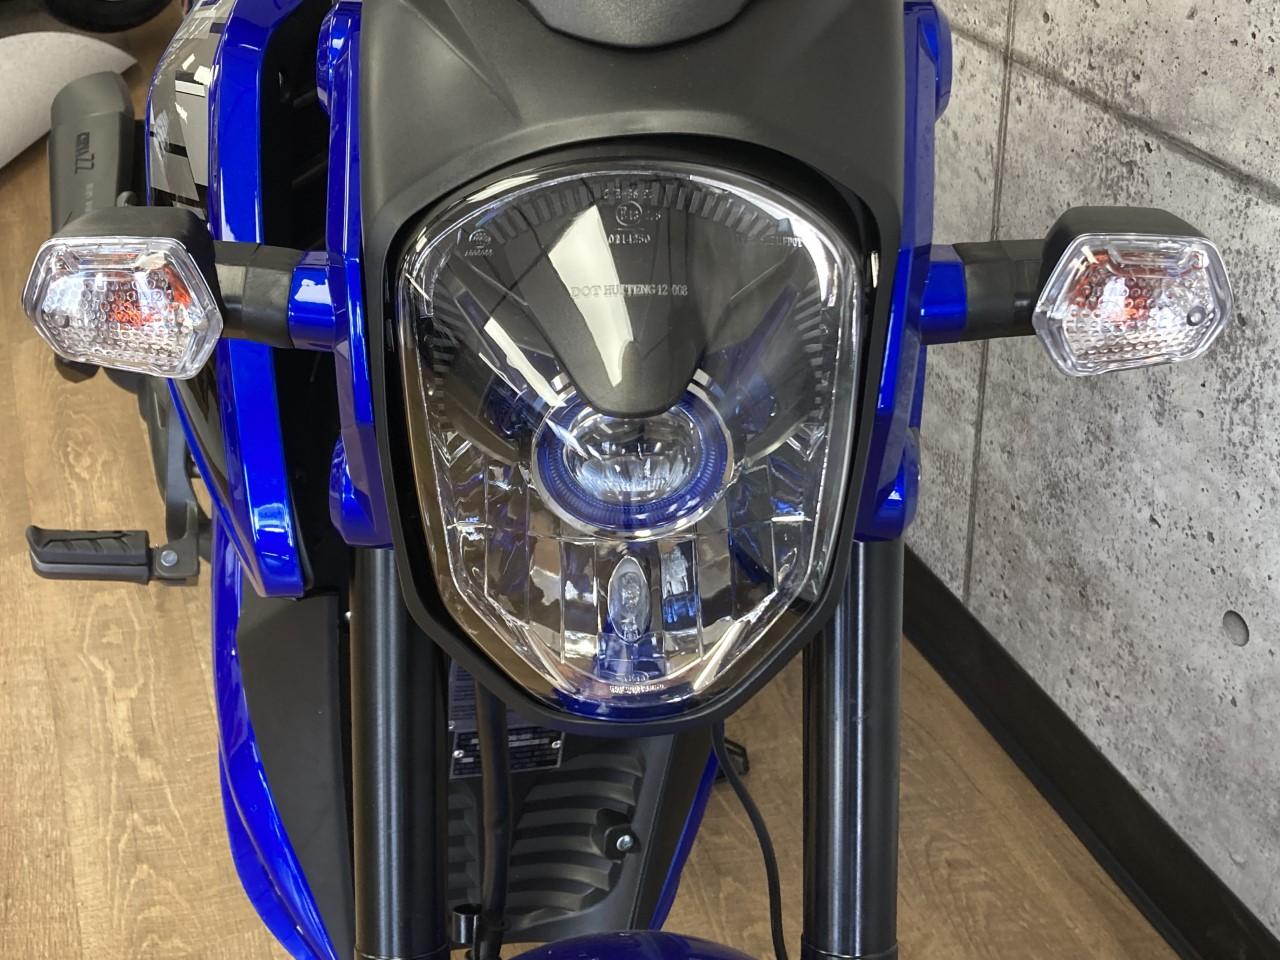 Scooter AR 50 Blue